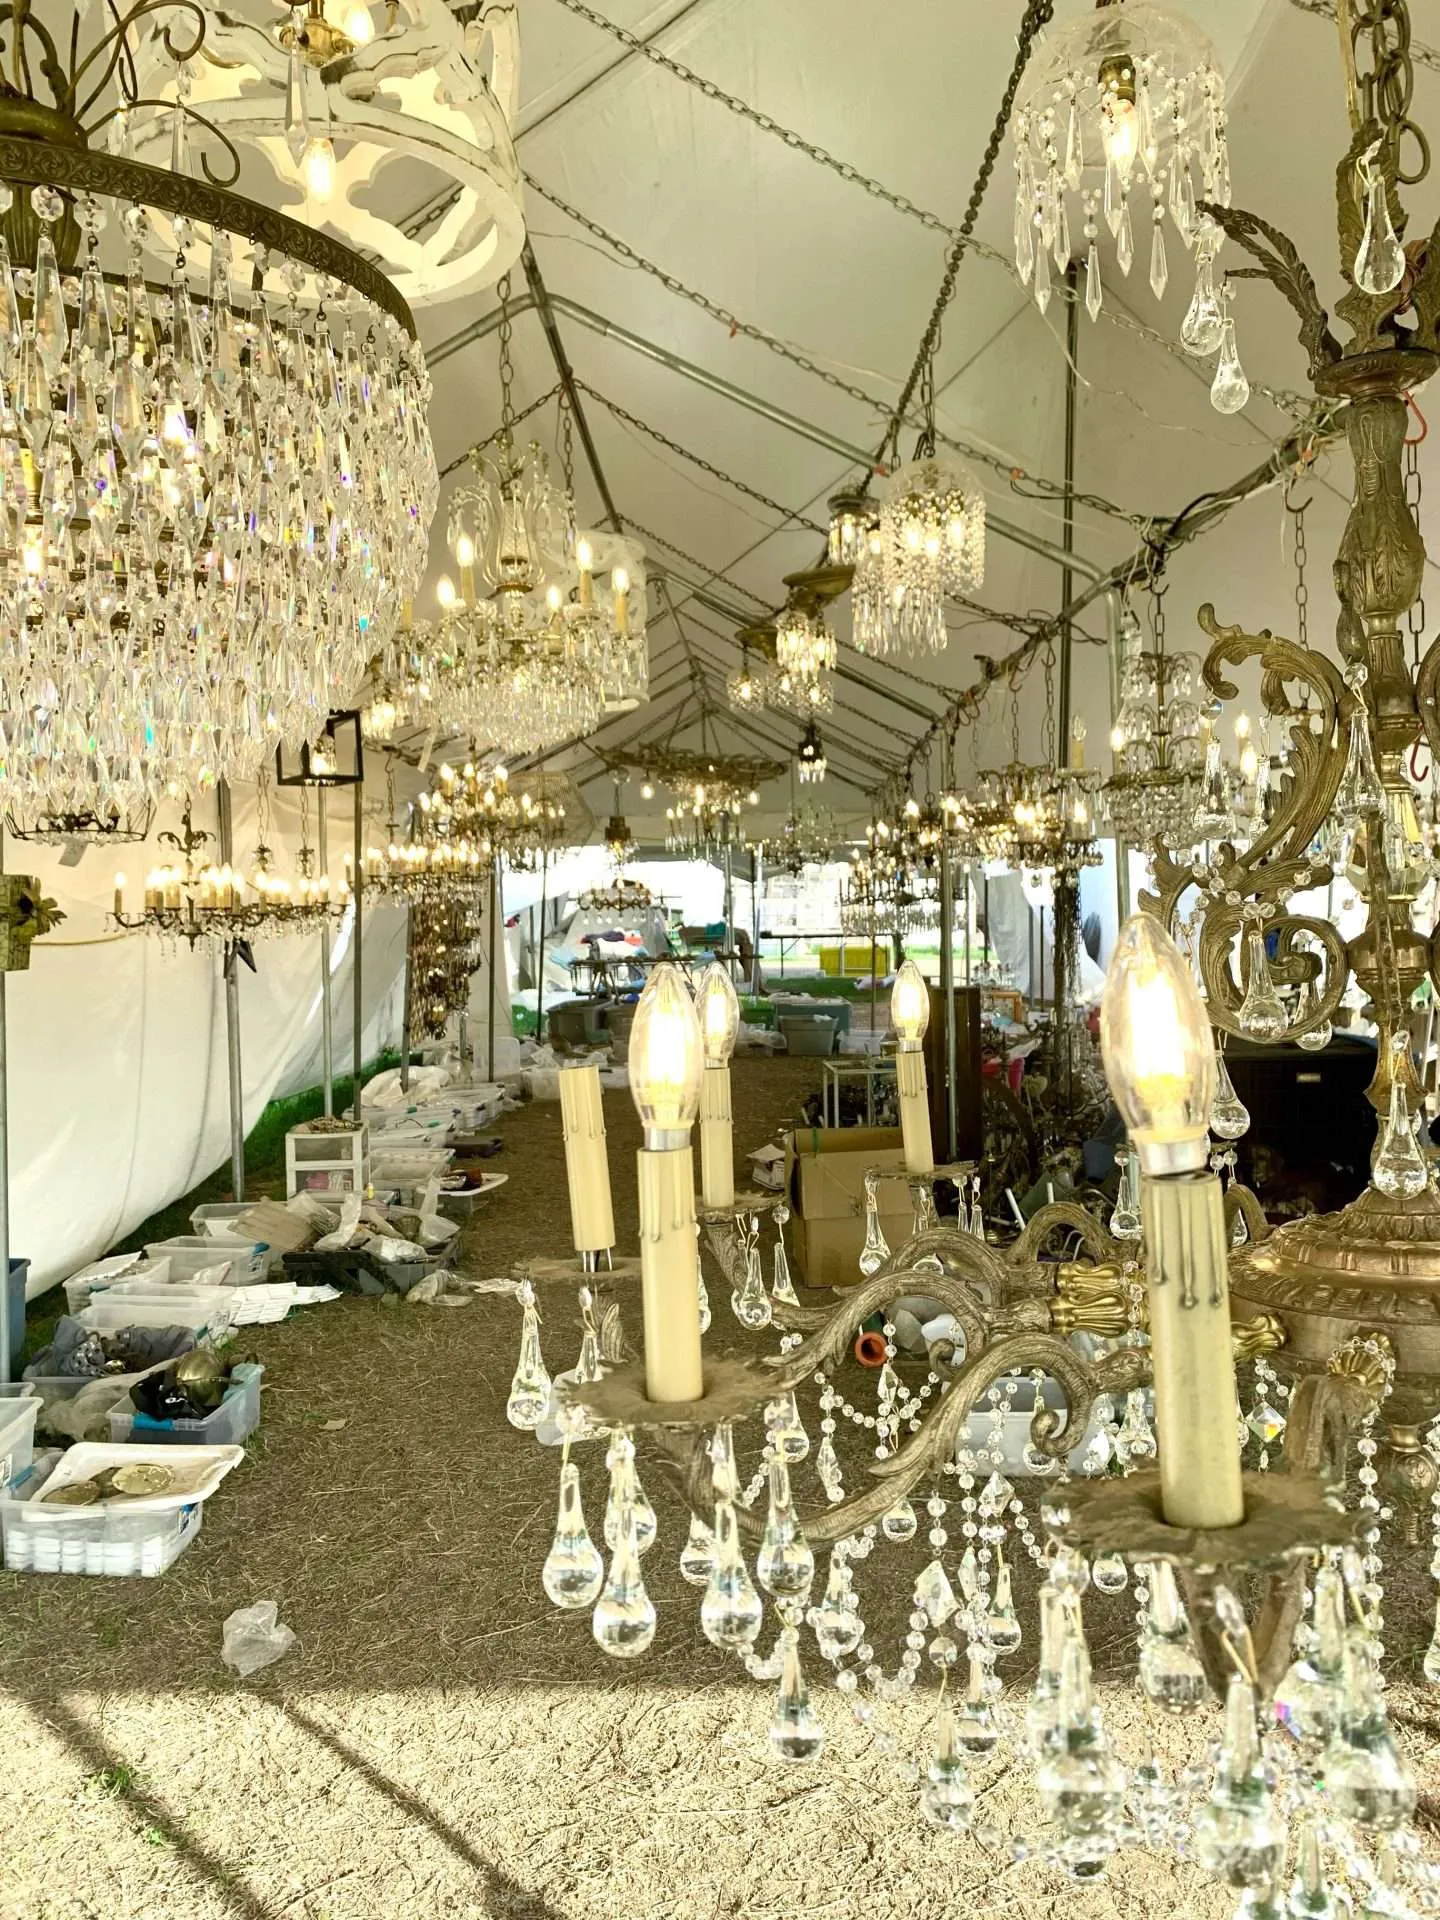 Handmade chandeliers for sale at the flea market.